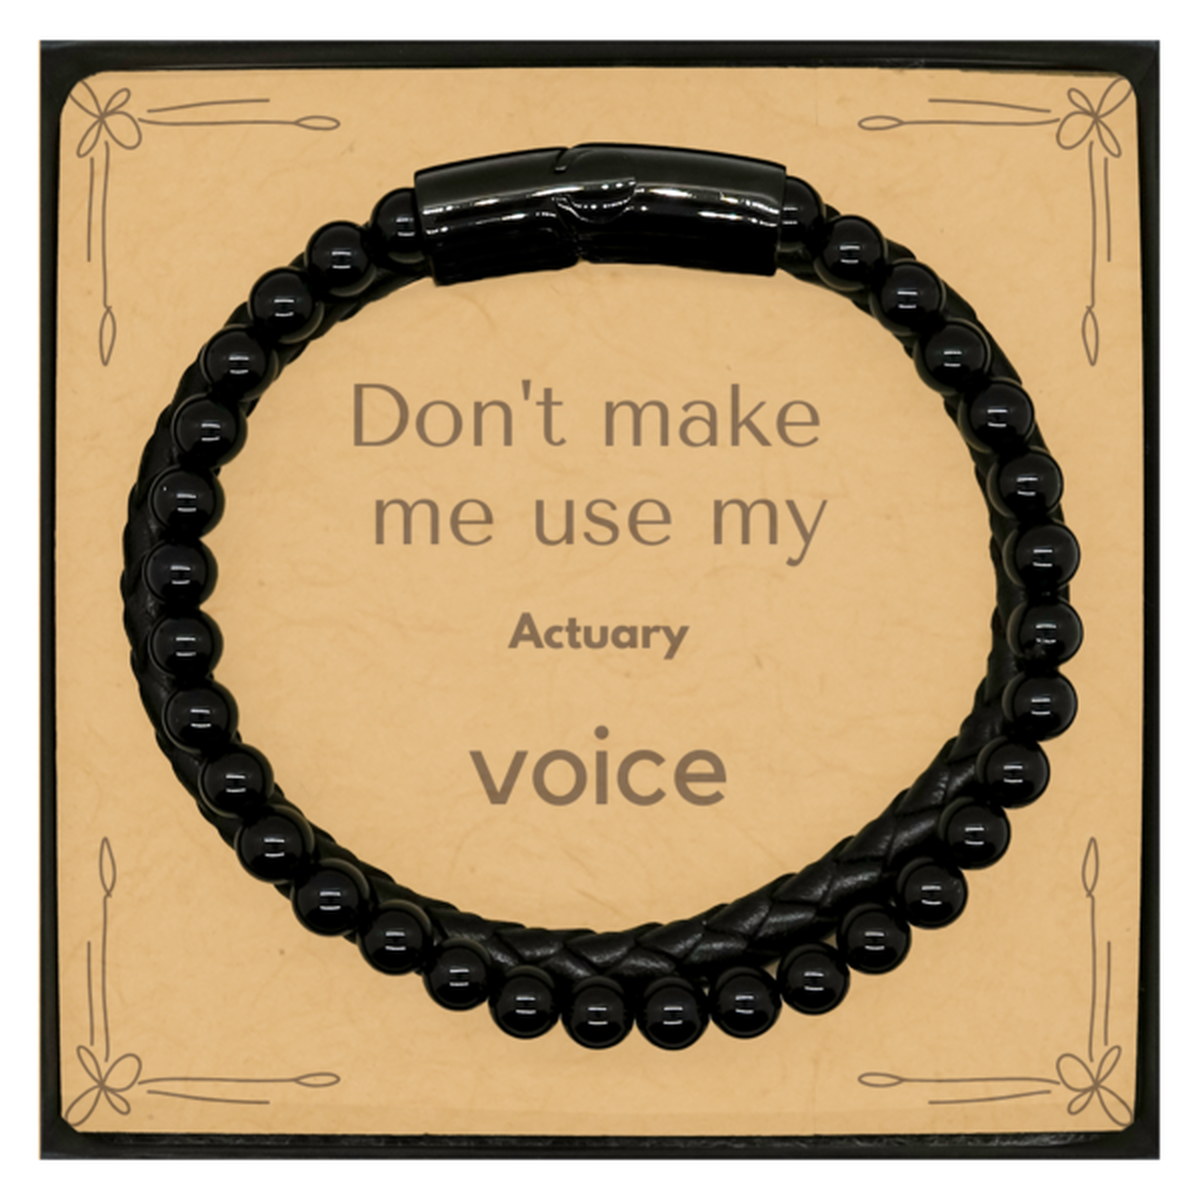 Don't make me use my Actuary voice, Sarcasm Actuary Card Gifts, Christmas Actuary Stone Leather Bracelets Birthday Unique Gifts For Actuary Coworkers, Men, Women, Colleague, Friends